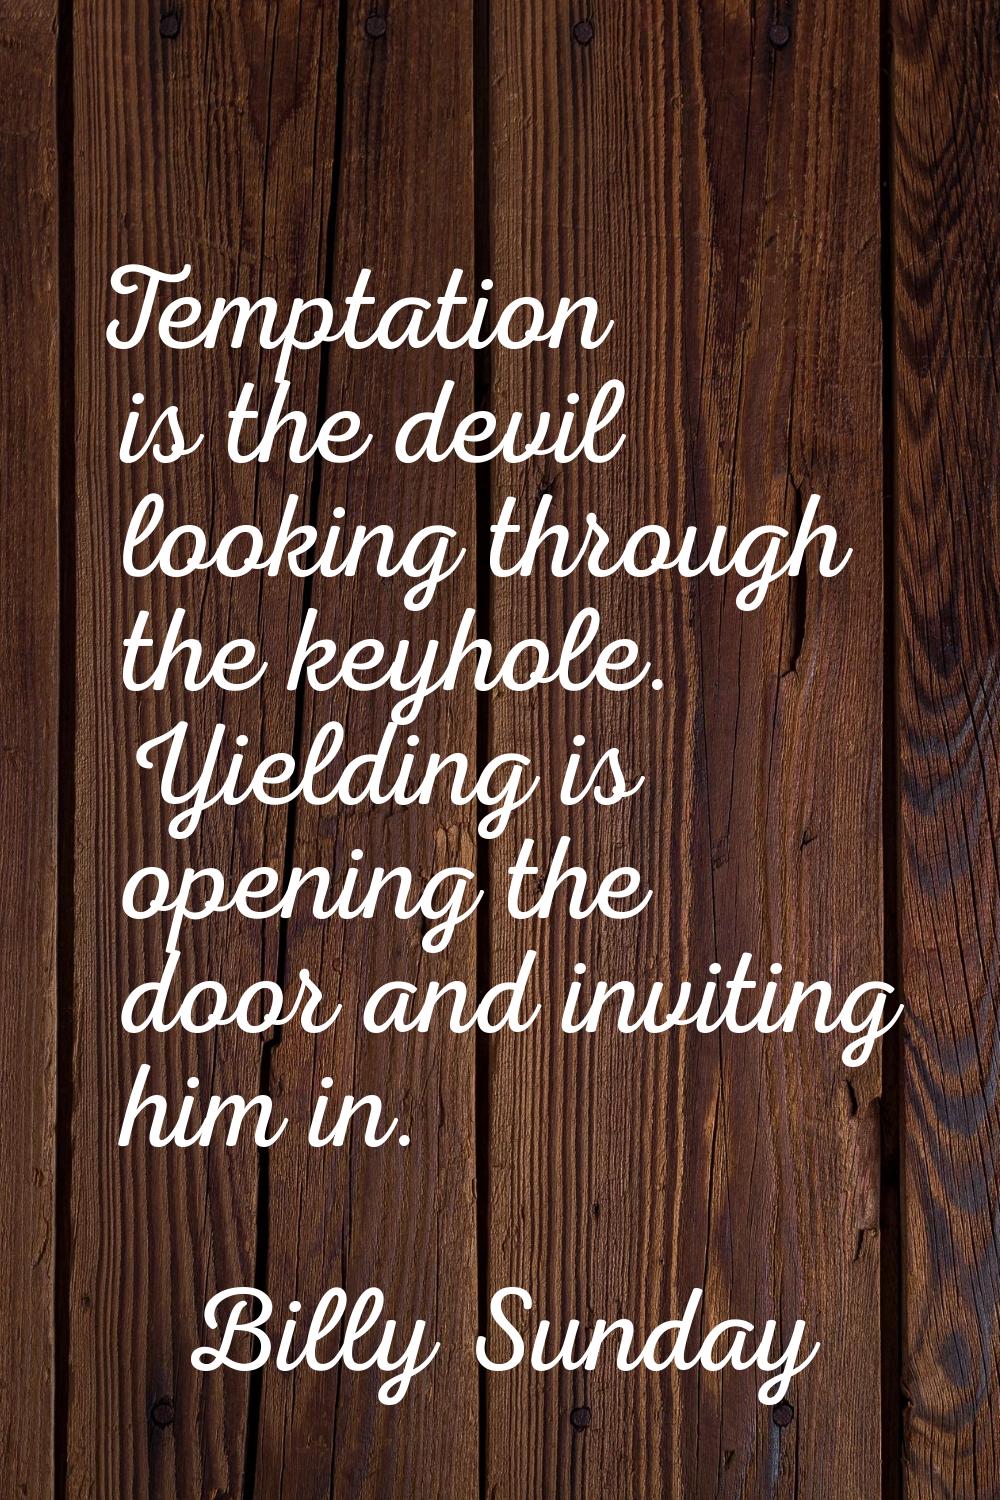 Temptation is the devil looking through the keyhole. Yielding is opening the door and inviting him 